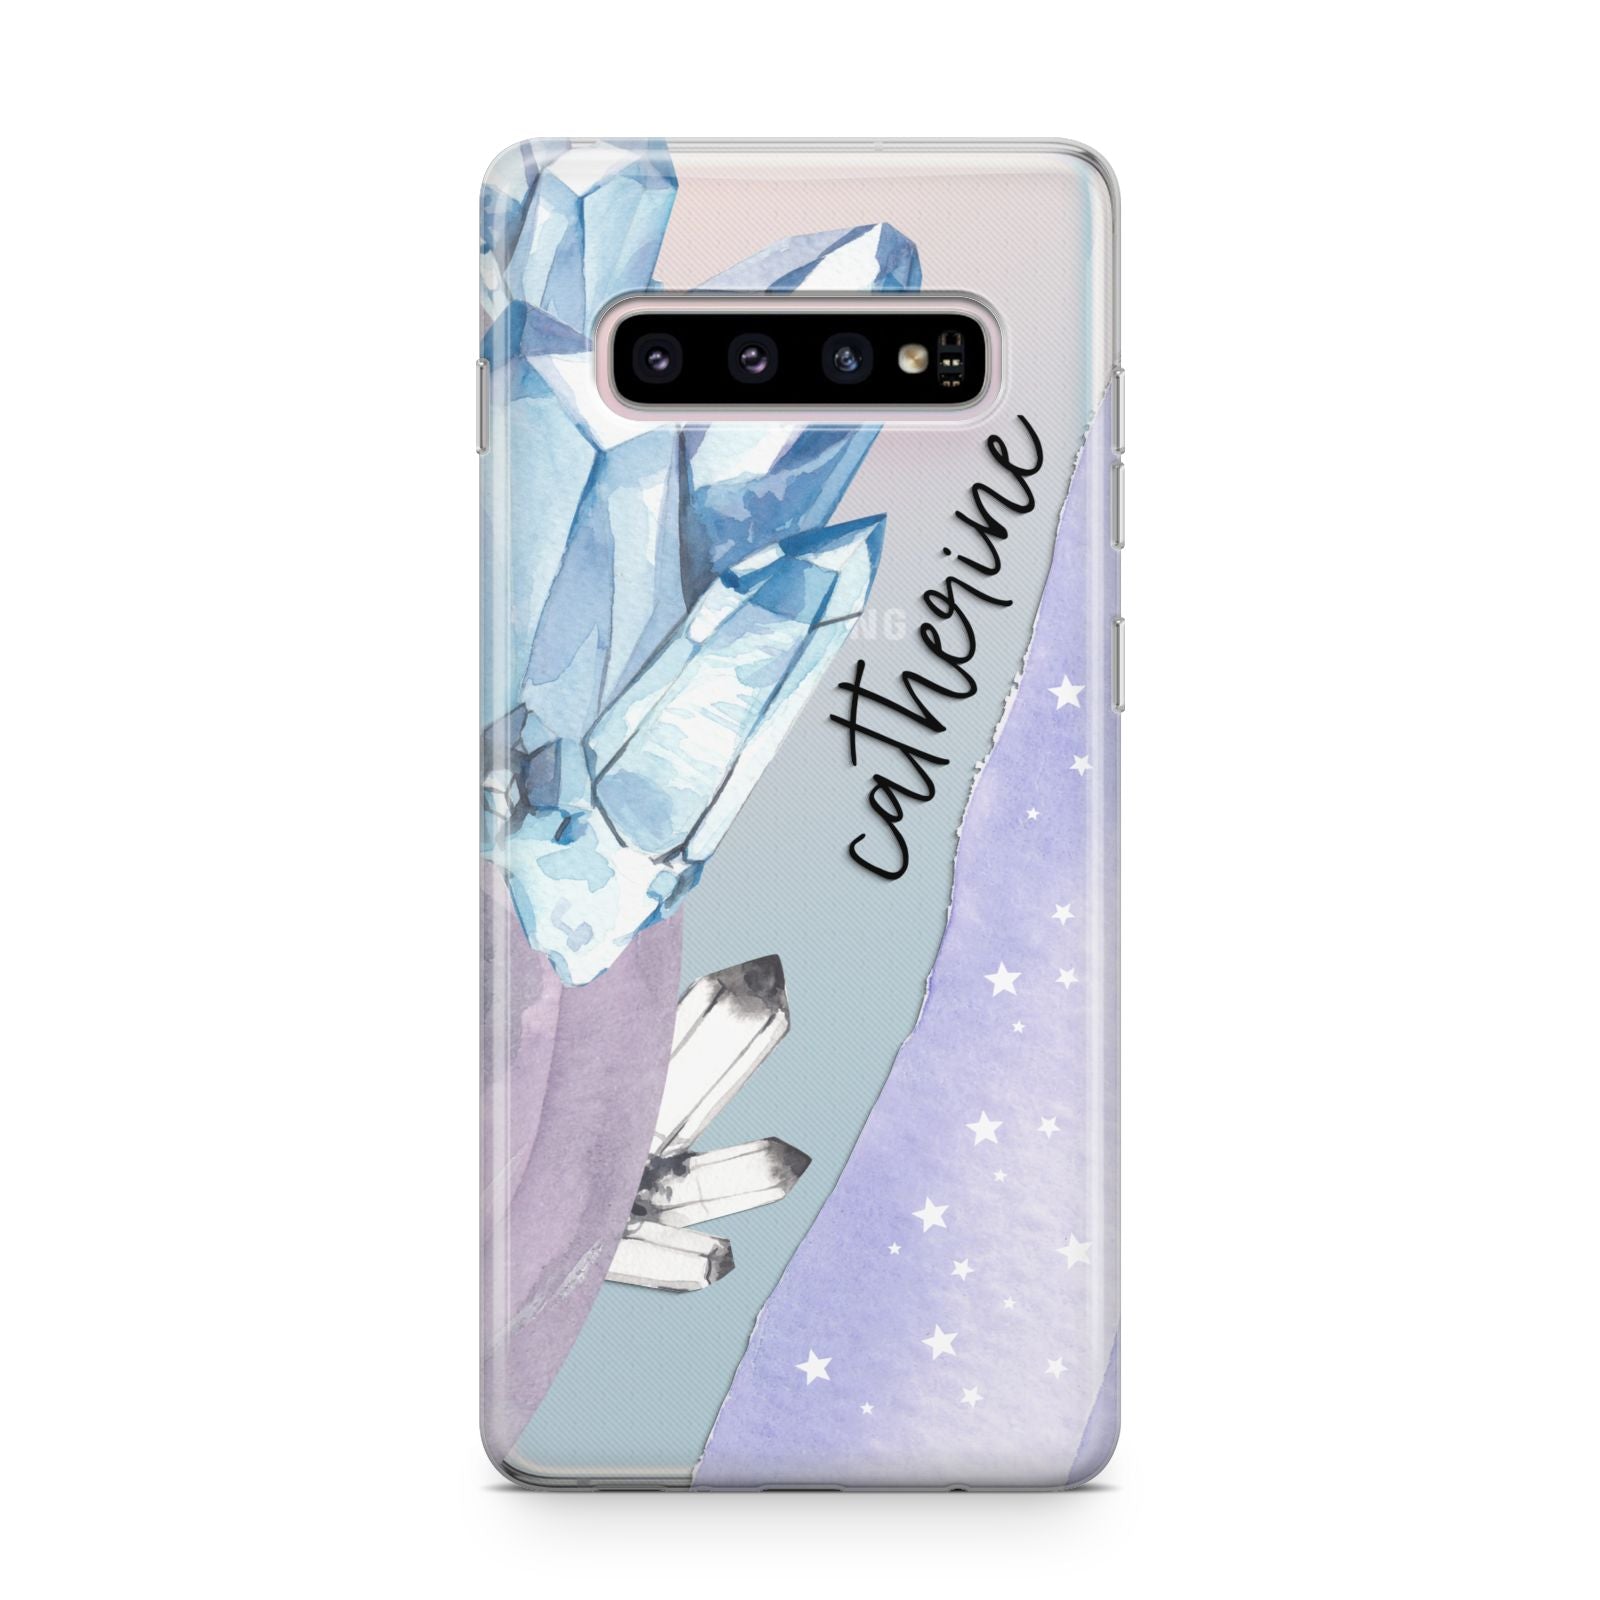 Crystals Personalised Name Samsung Galaxy S10 Plus Case